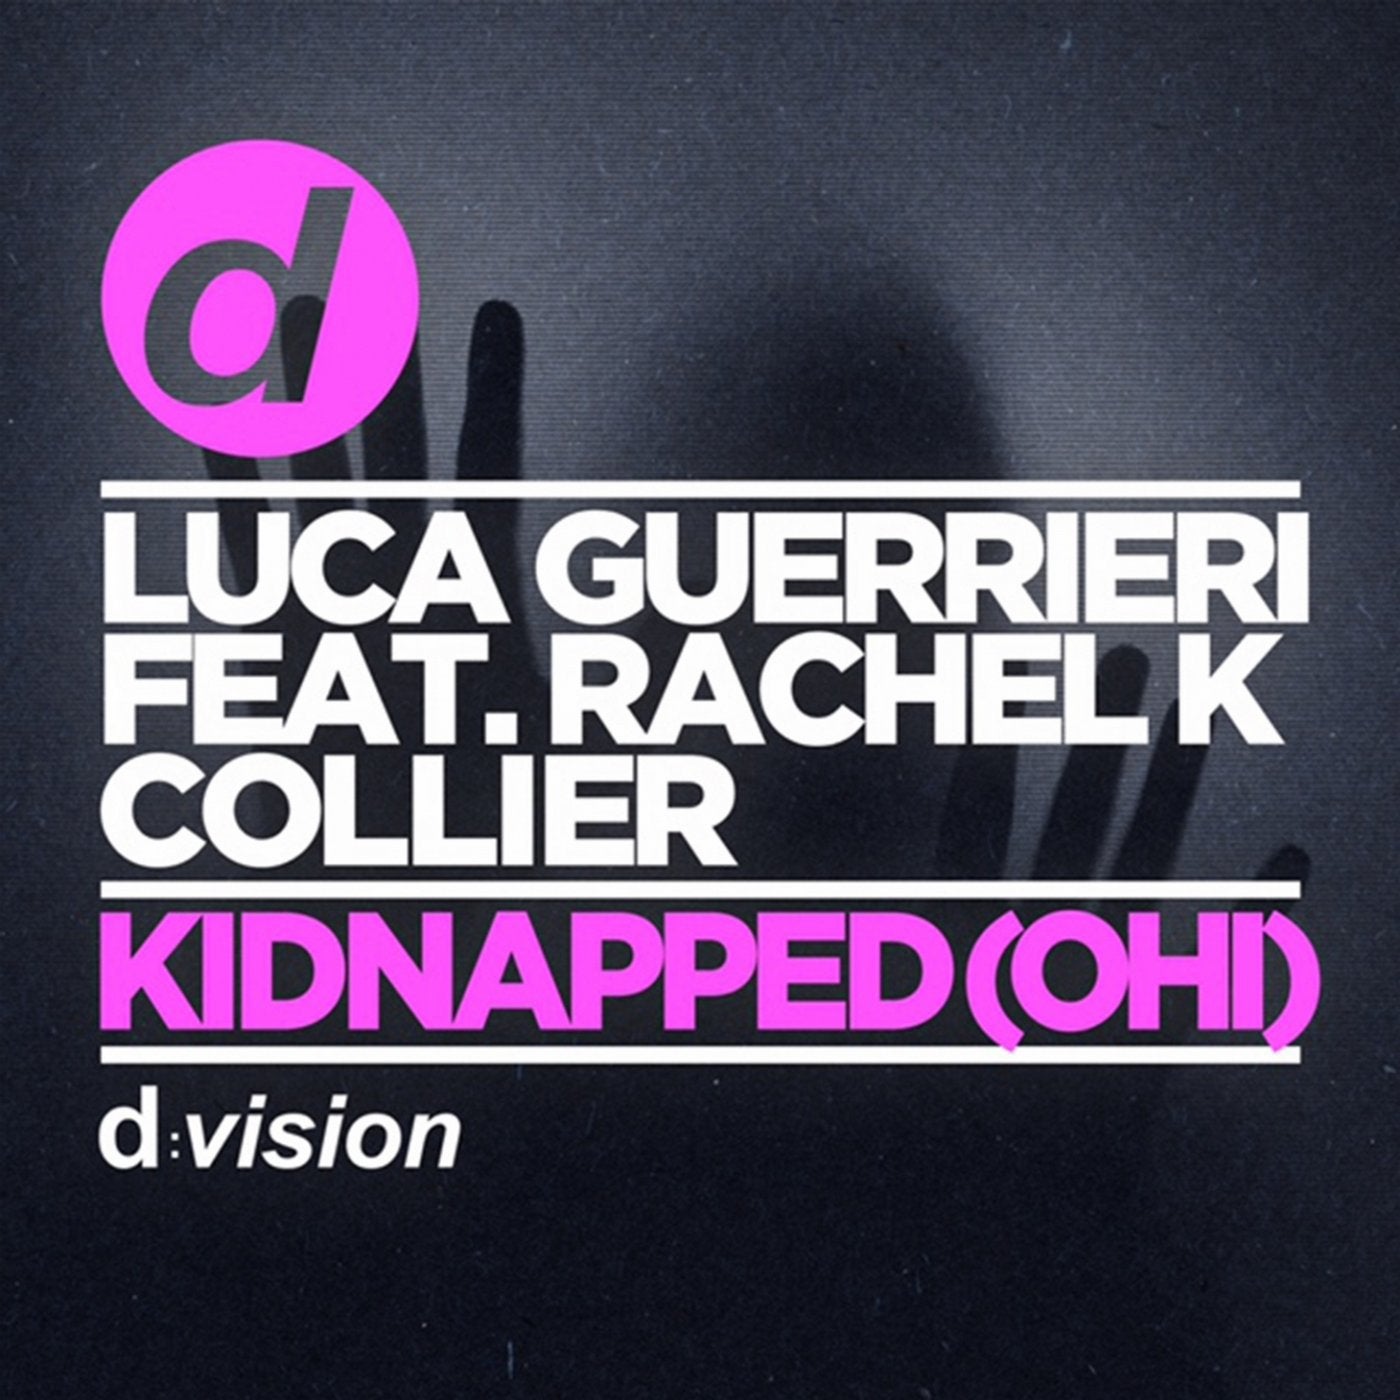 Kidnapped (Ohi) (feat. Rachel k Collier) [Club Mix]